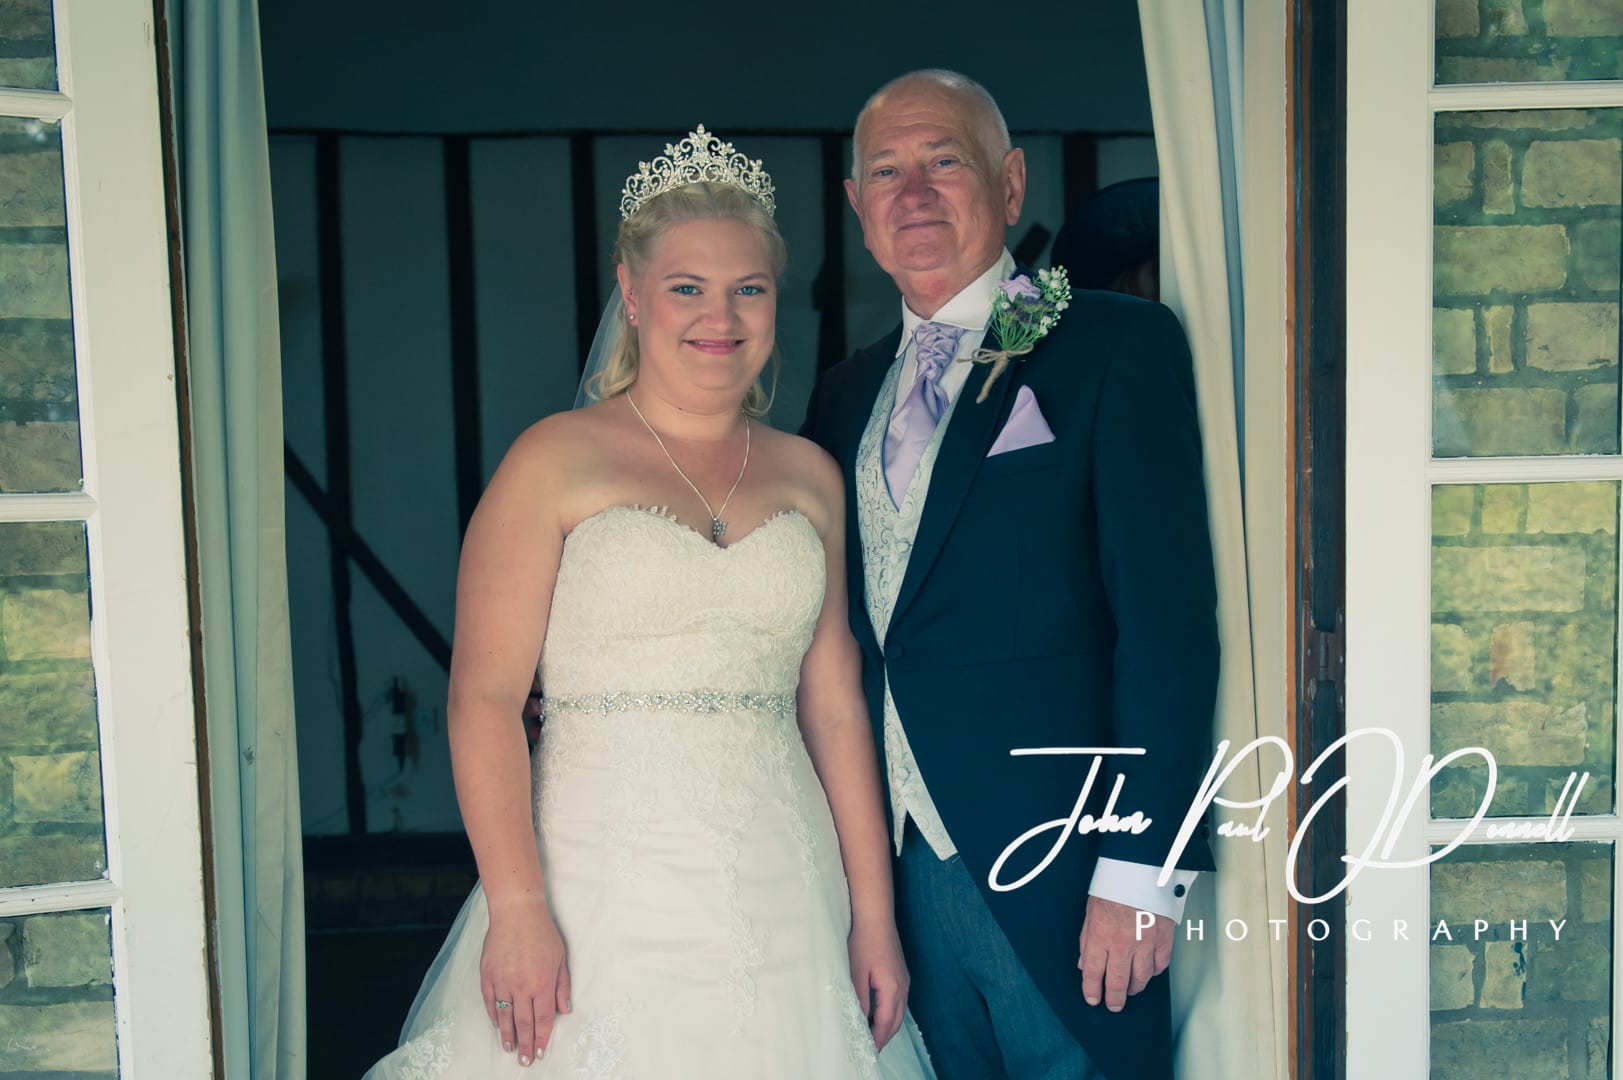 Abbie and Will's summer wedding at Minstrel Court in Royston